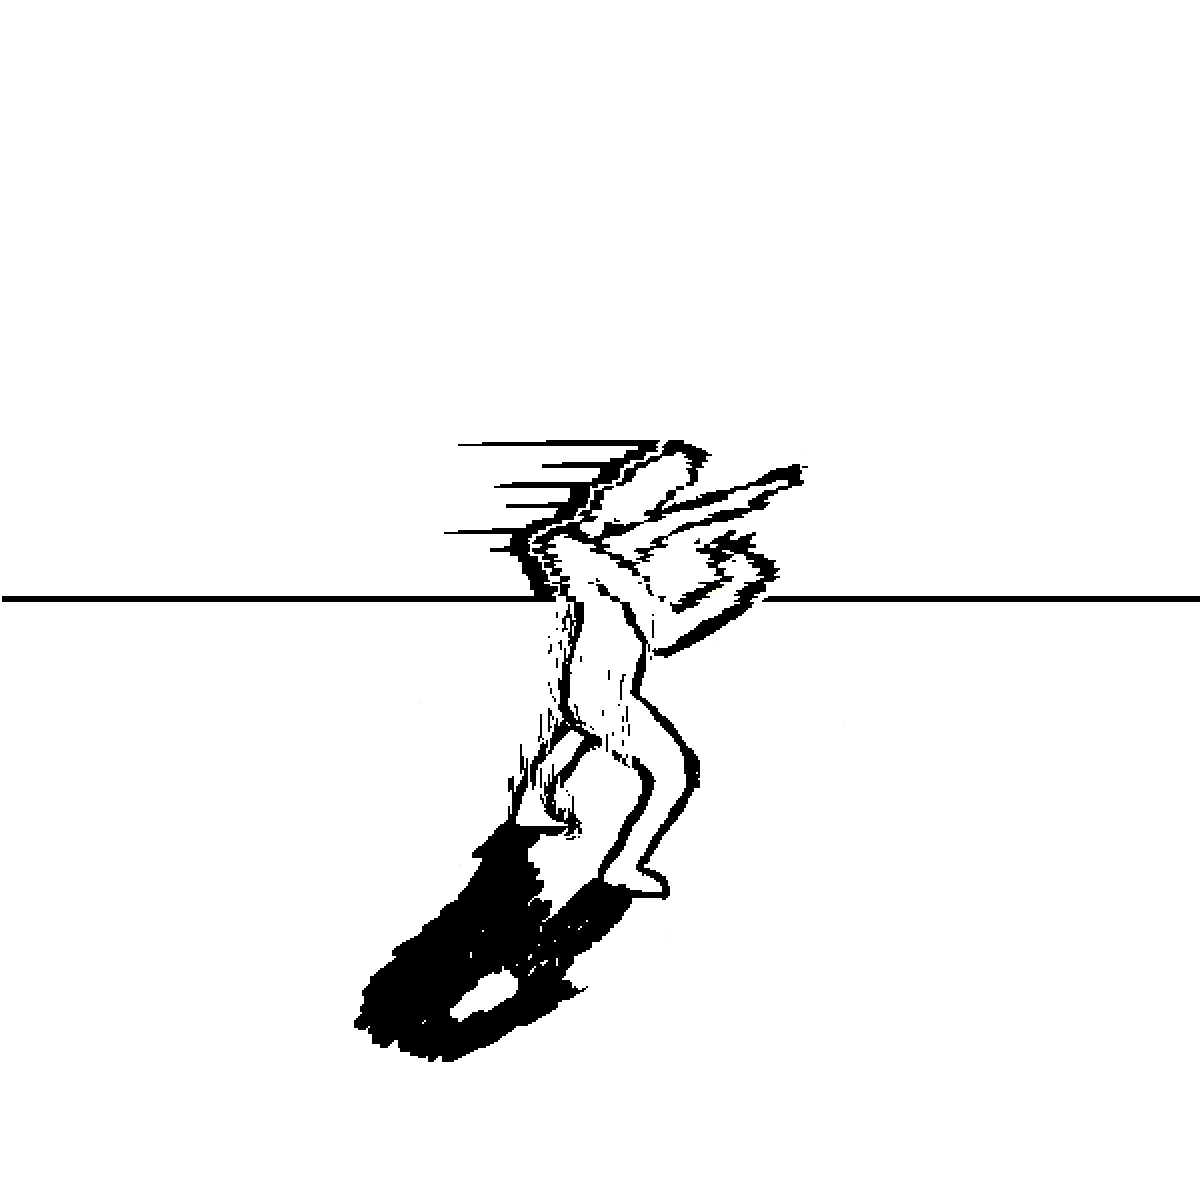 a surreal microsoft paint drawing of a figure stopping at the impact of a blast